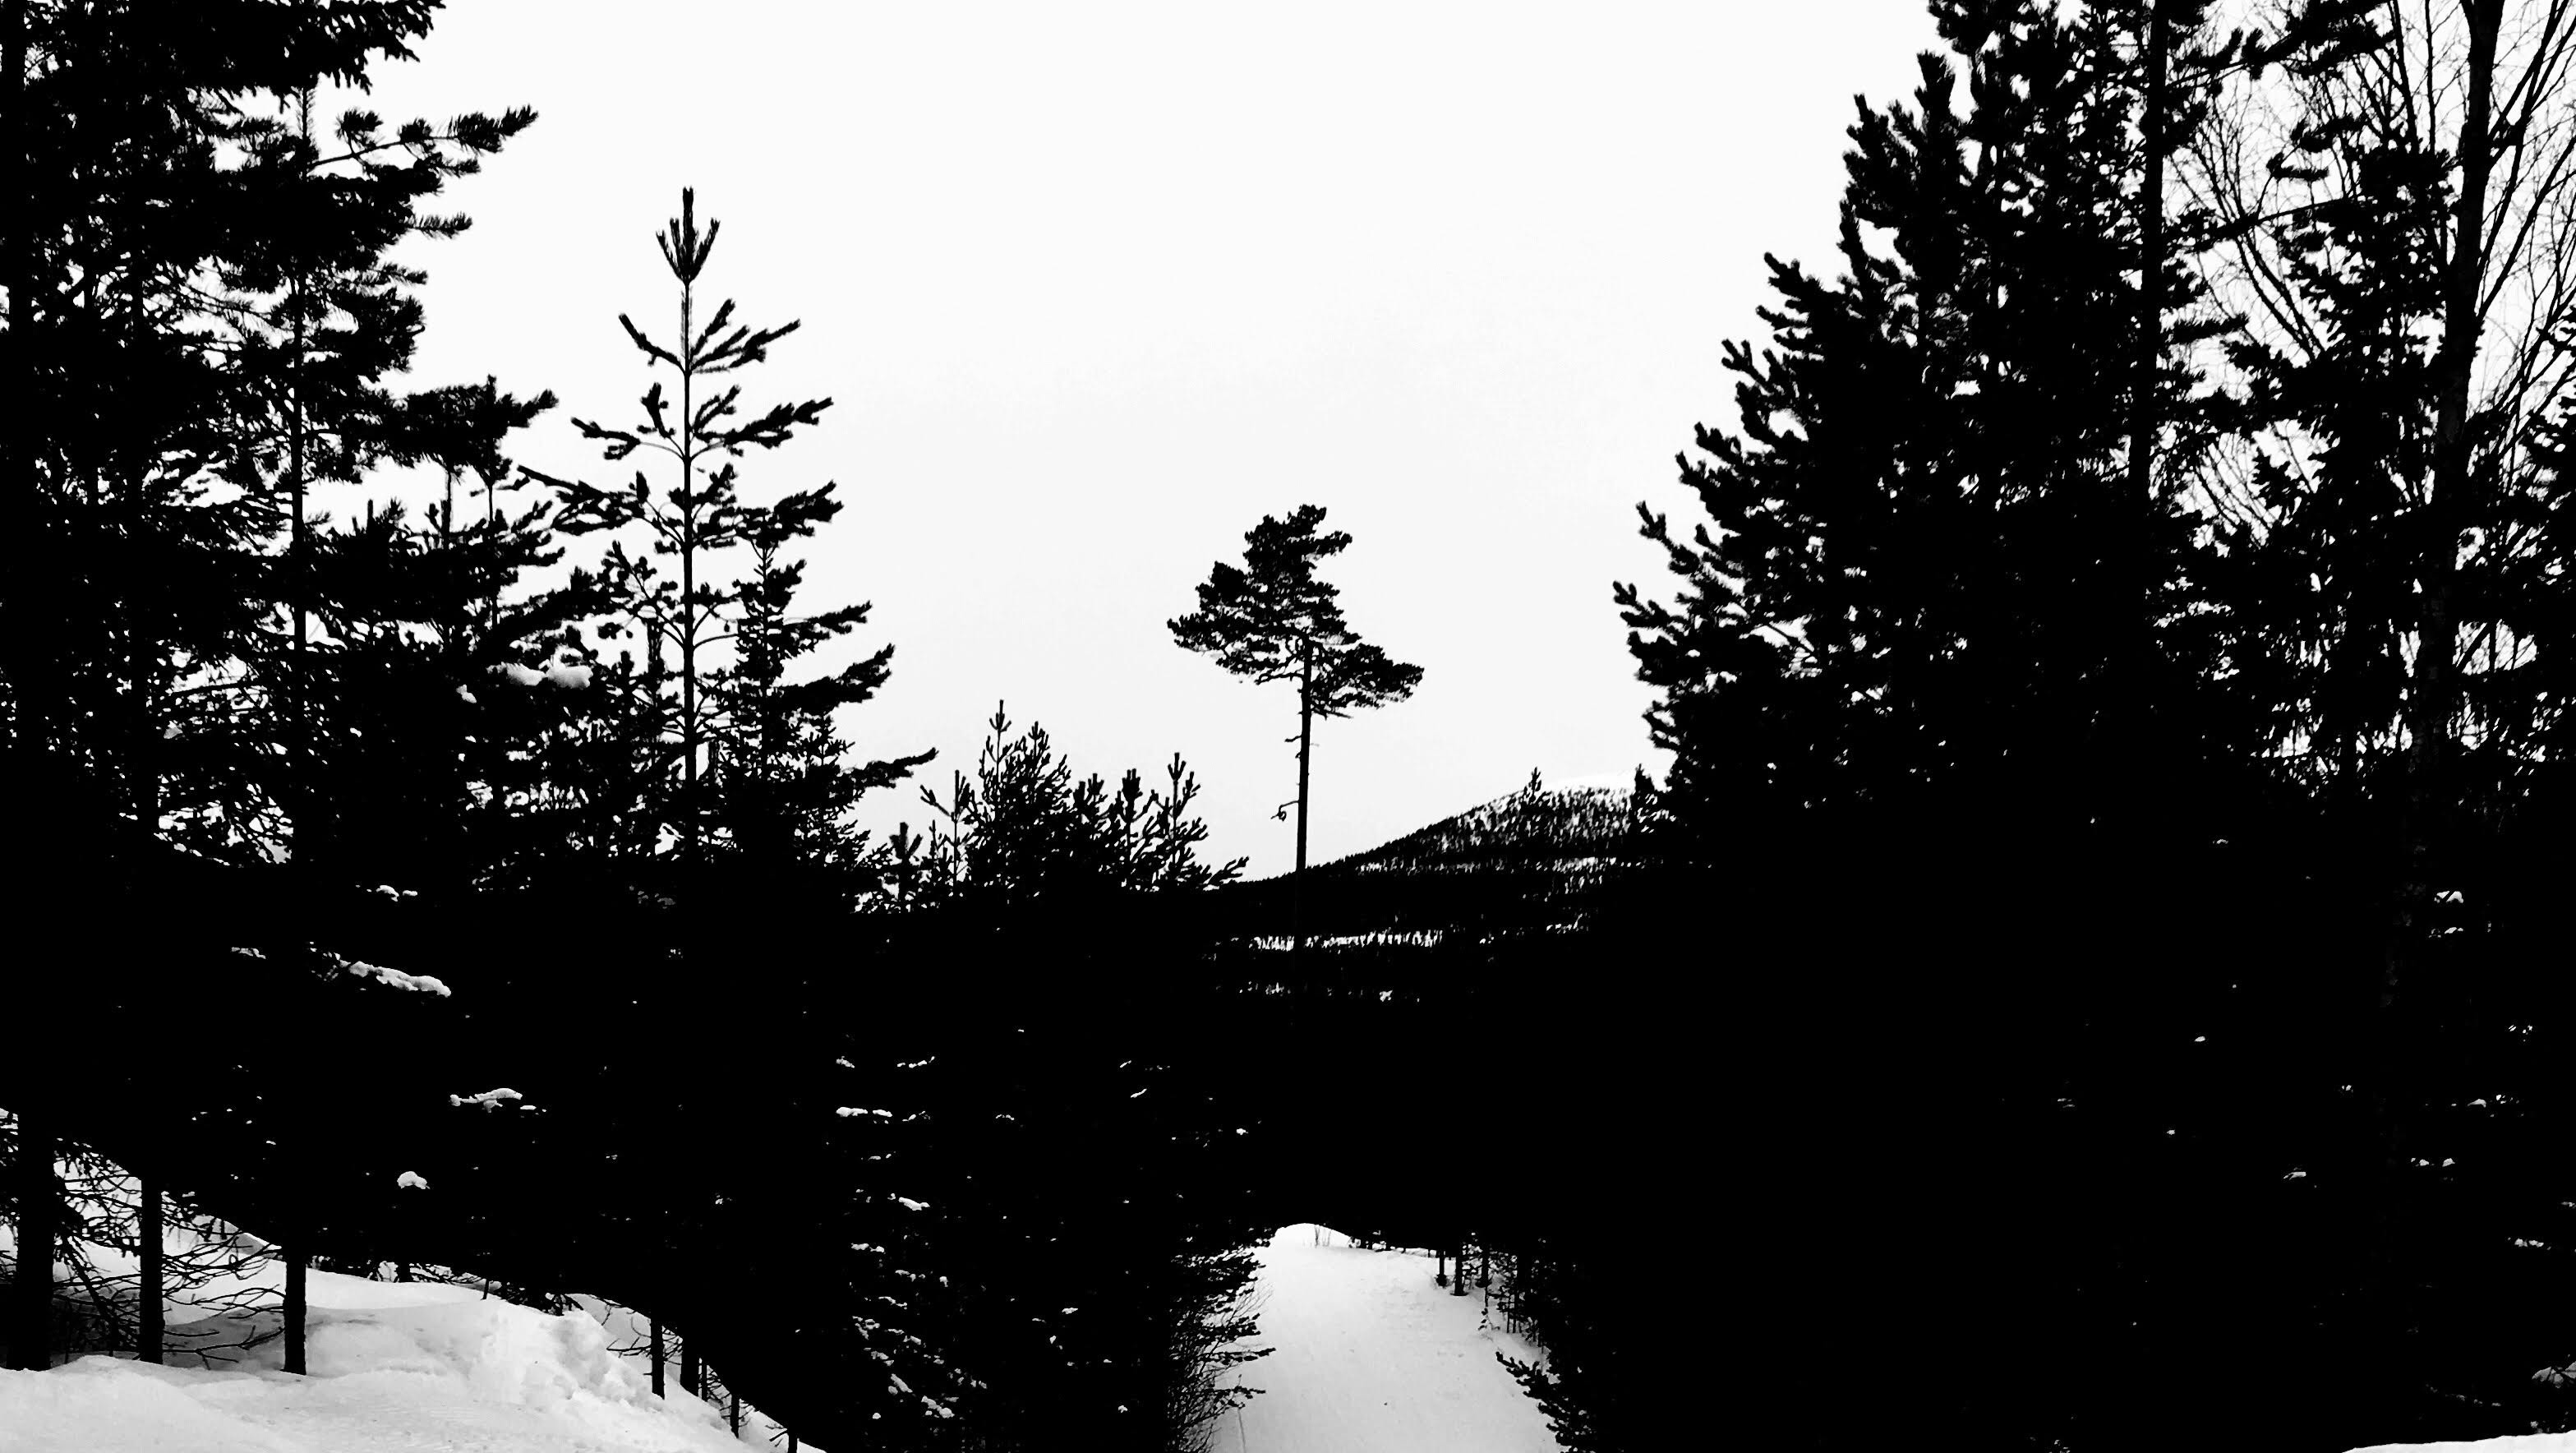 Wallpaper, mountains, nature, snow, winter, silhouette, branch, loneliness, pine trees, tree, weather, season, darkness, black and white, monochrome photography, woody plant 3135x1768